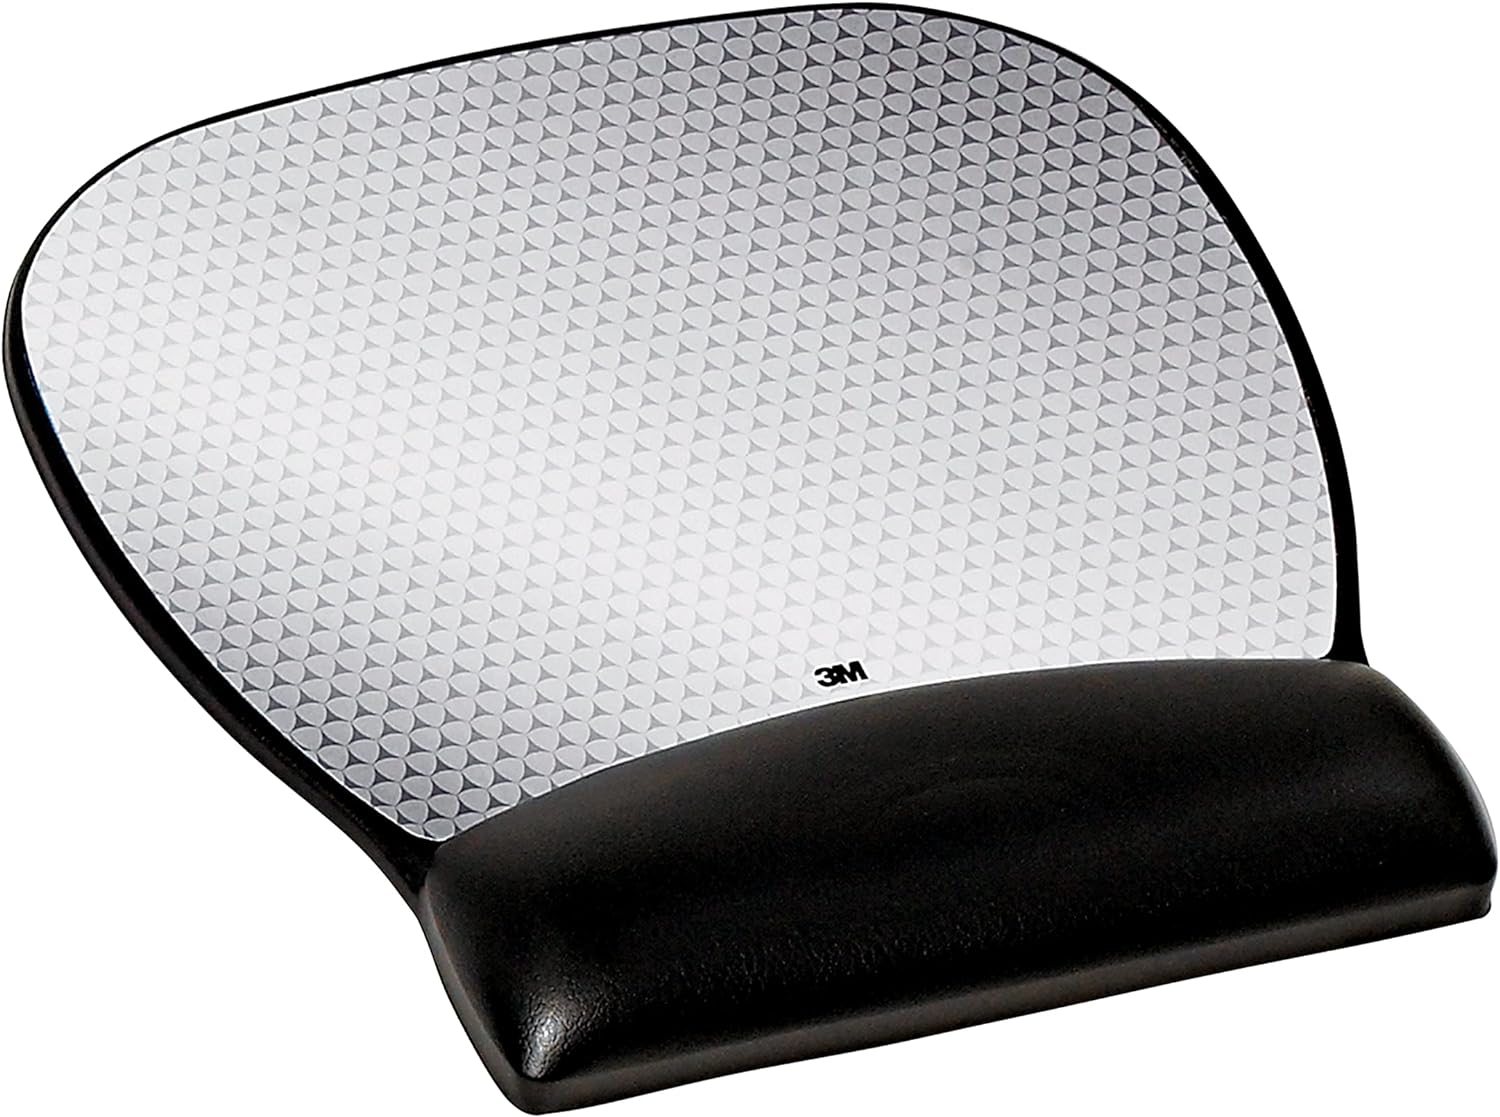 3M Precise Mouse Pad with Gel Wrist Rest, Soothing Gel Comfort with Durable, Easy to Clean Leatherette Cover, Optical Mouse Performance and Battery Saving Design, 9.2 x 8.7, Black (MW310LE)